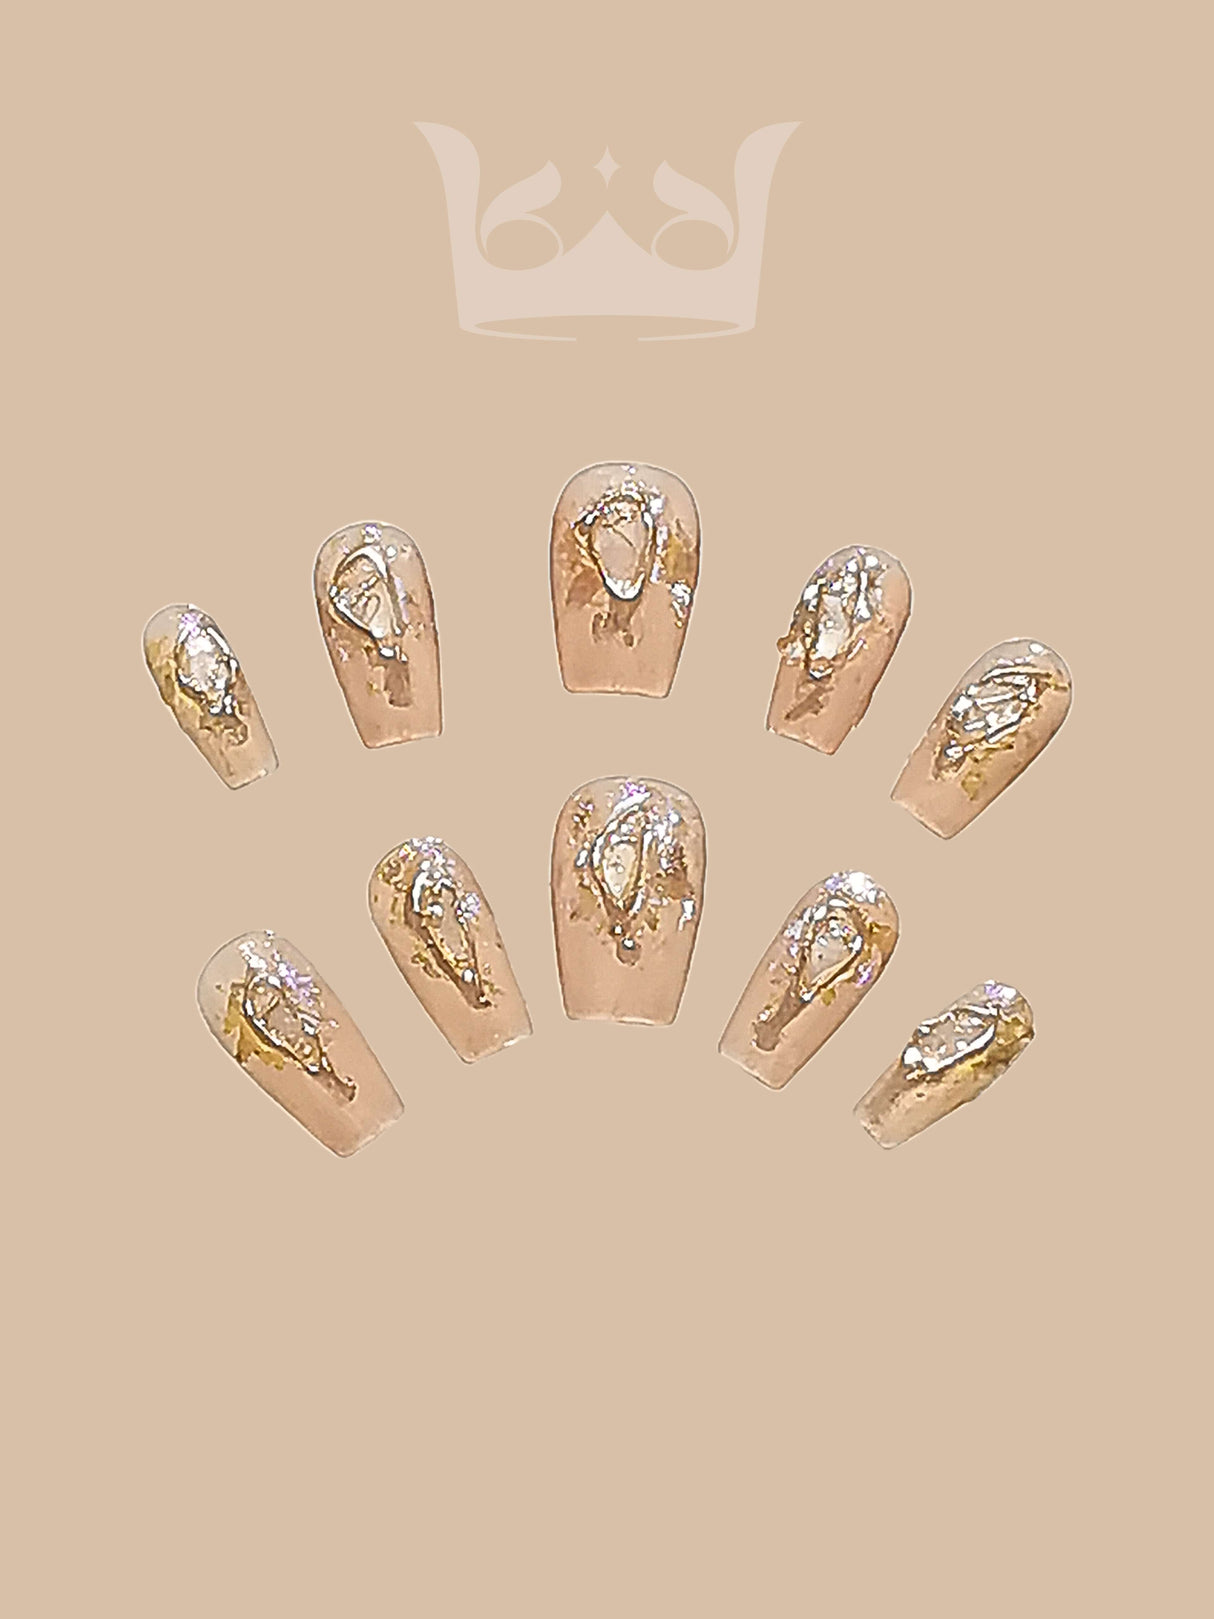 Chic and versatile nails with nude base and gold foil accents towards tips, rounded/oval shape, suitable for everyday/formal occasions. Elegant and eye-catching.